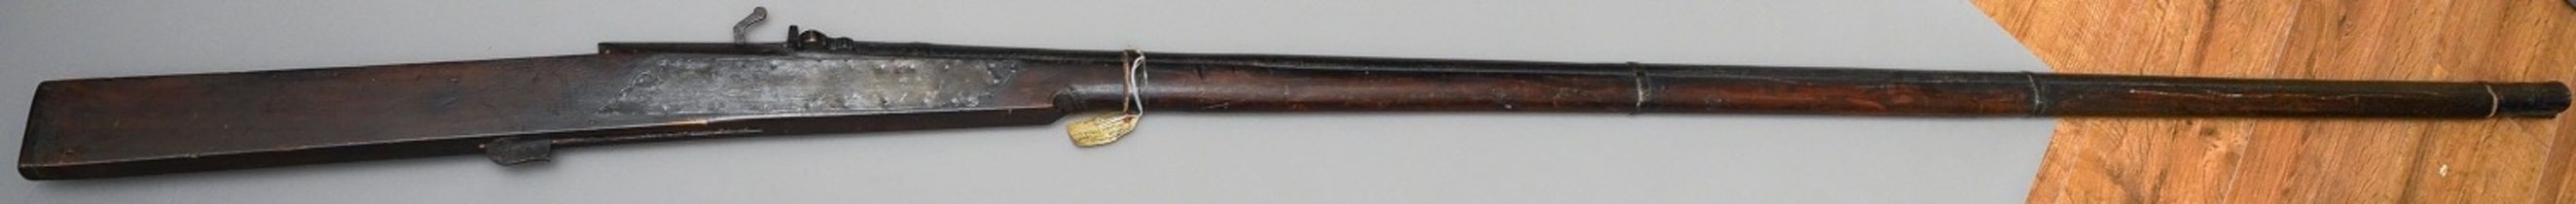 AN UNUSUALLY LARGE 19TH CENTURY AFGHAN JEZAIL MATCHLOCK RAMPART GUN Wooden stock and decorative